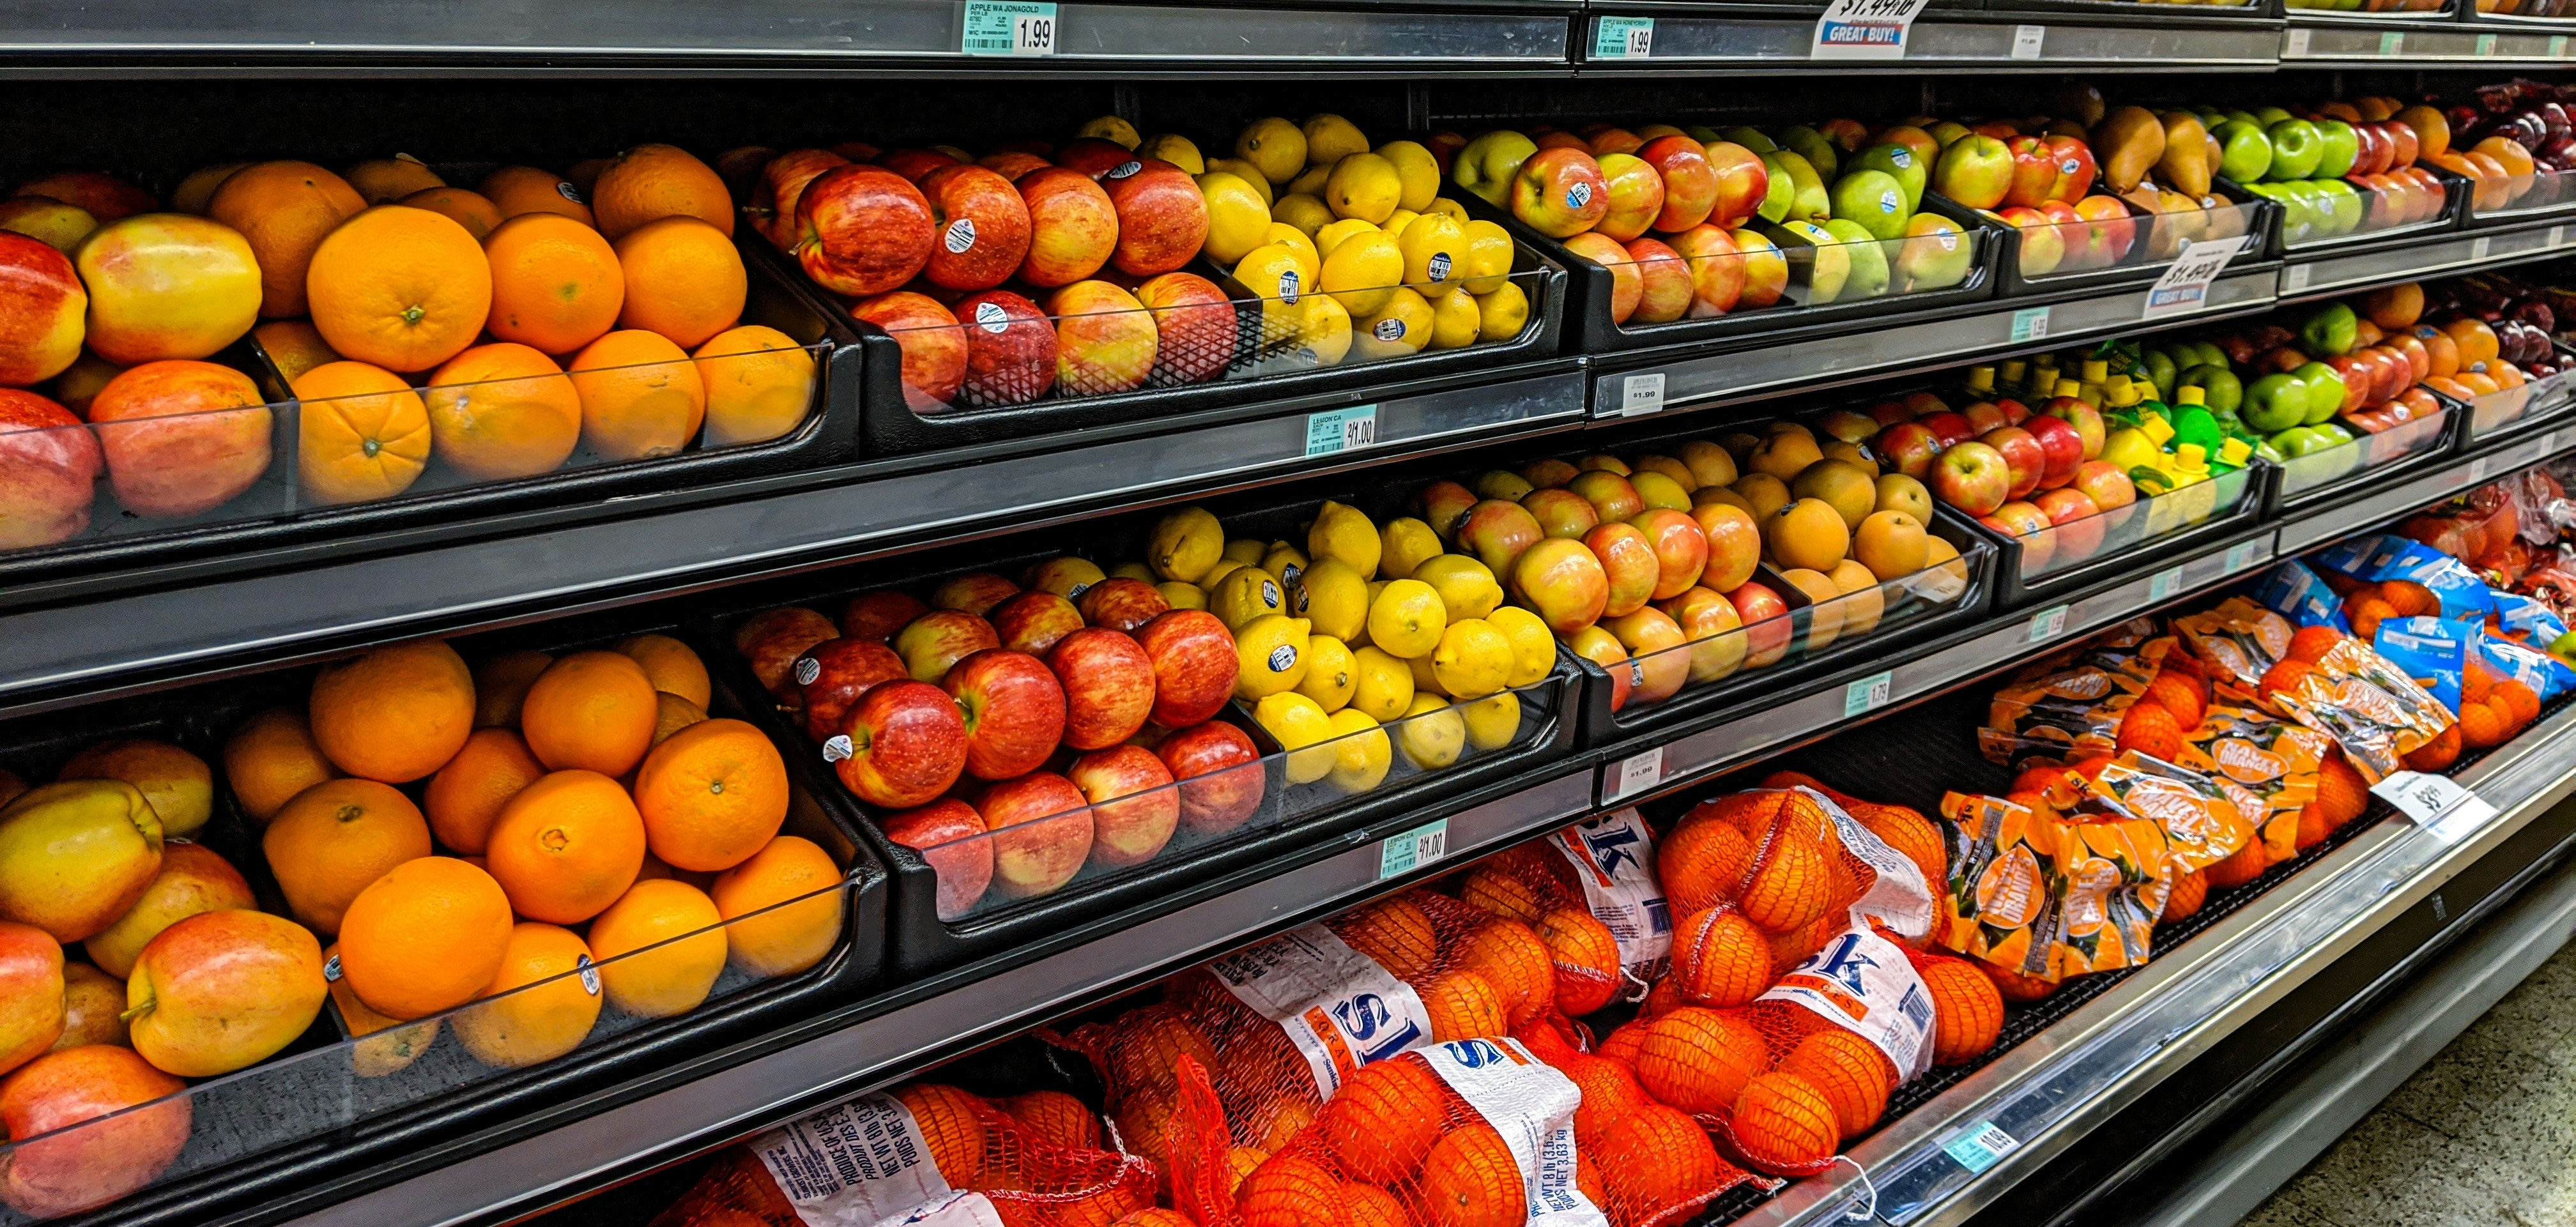 A fruit aisle in a supermarket, the shelves are filled with oranges, apples, limes and lemons.